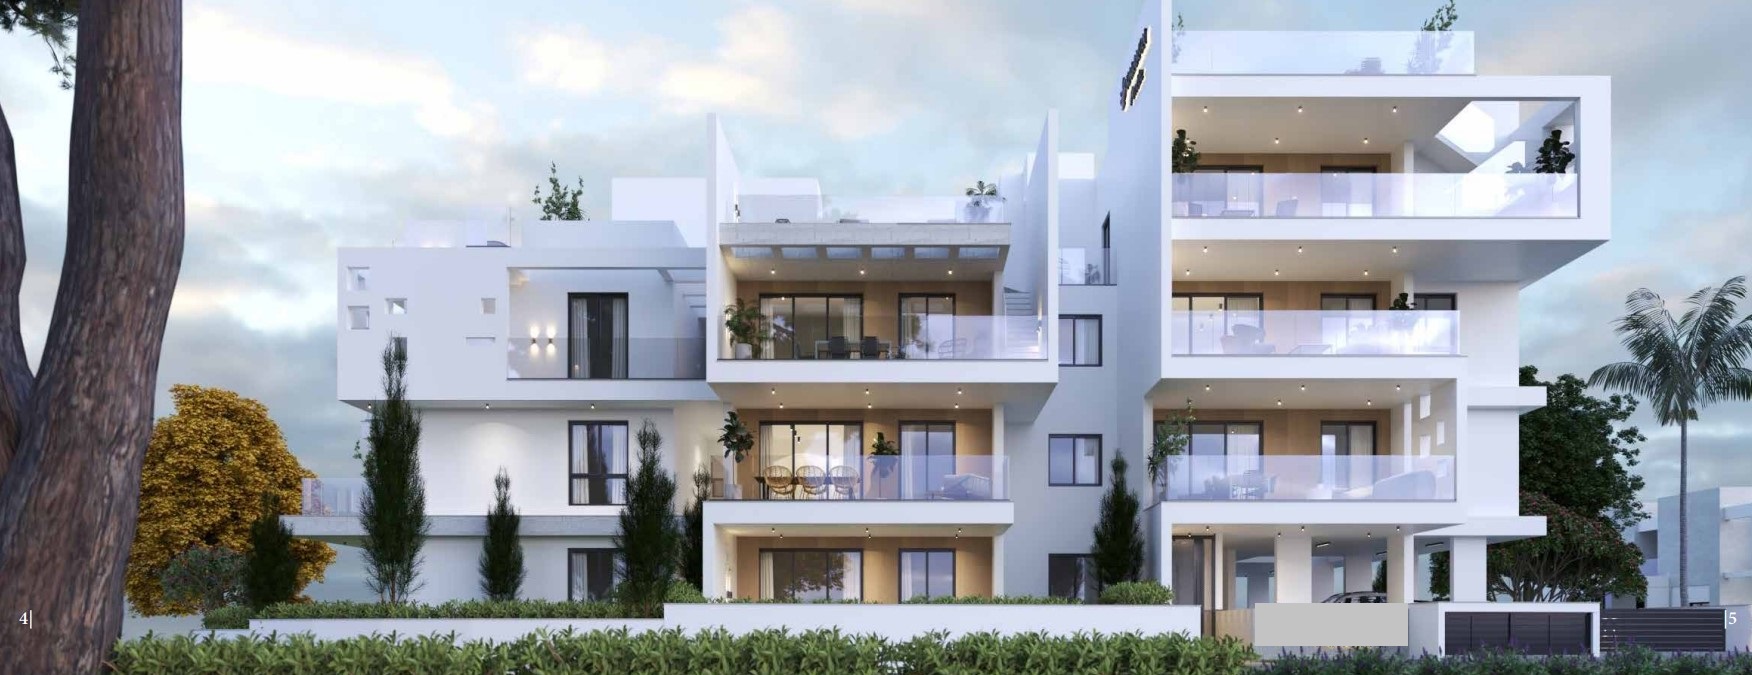 3 Bedroom Apartment for Sale in Aradippou, Larnaca District